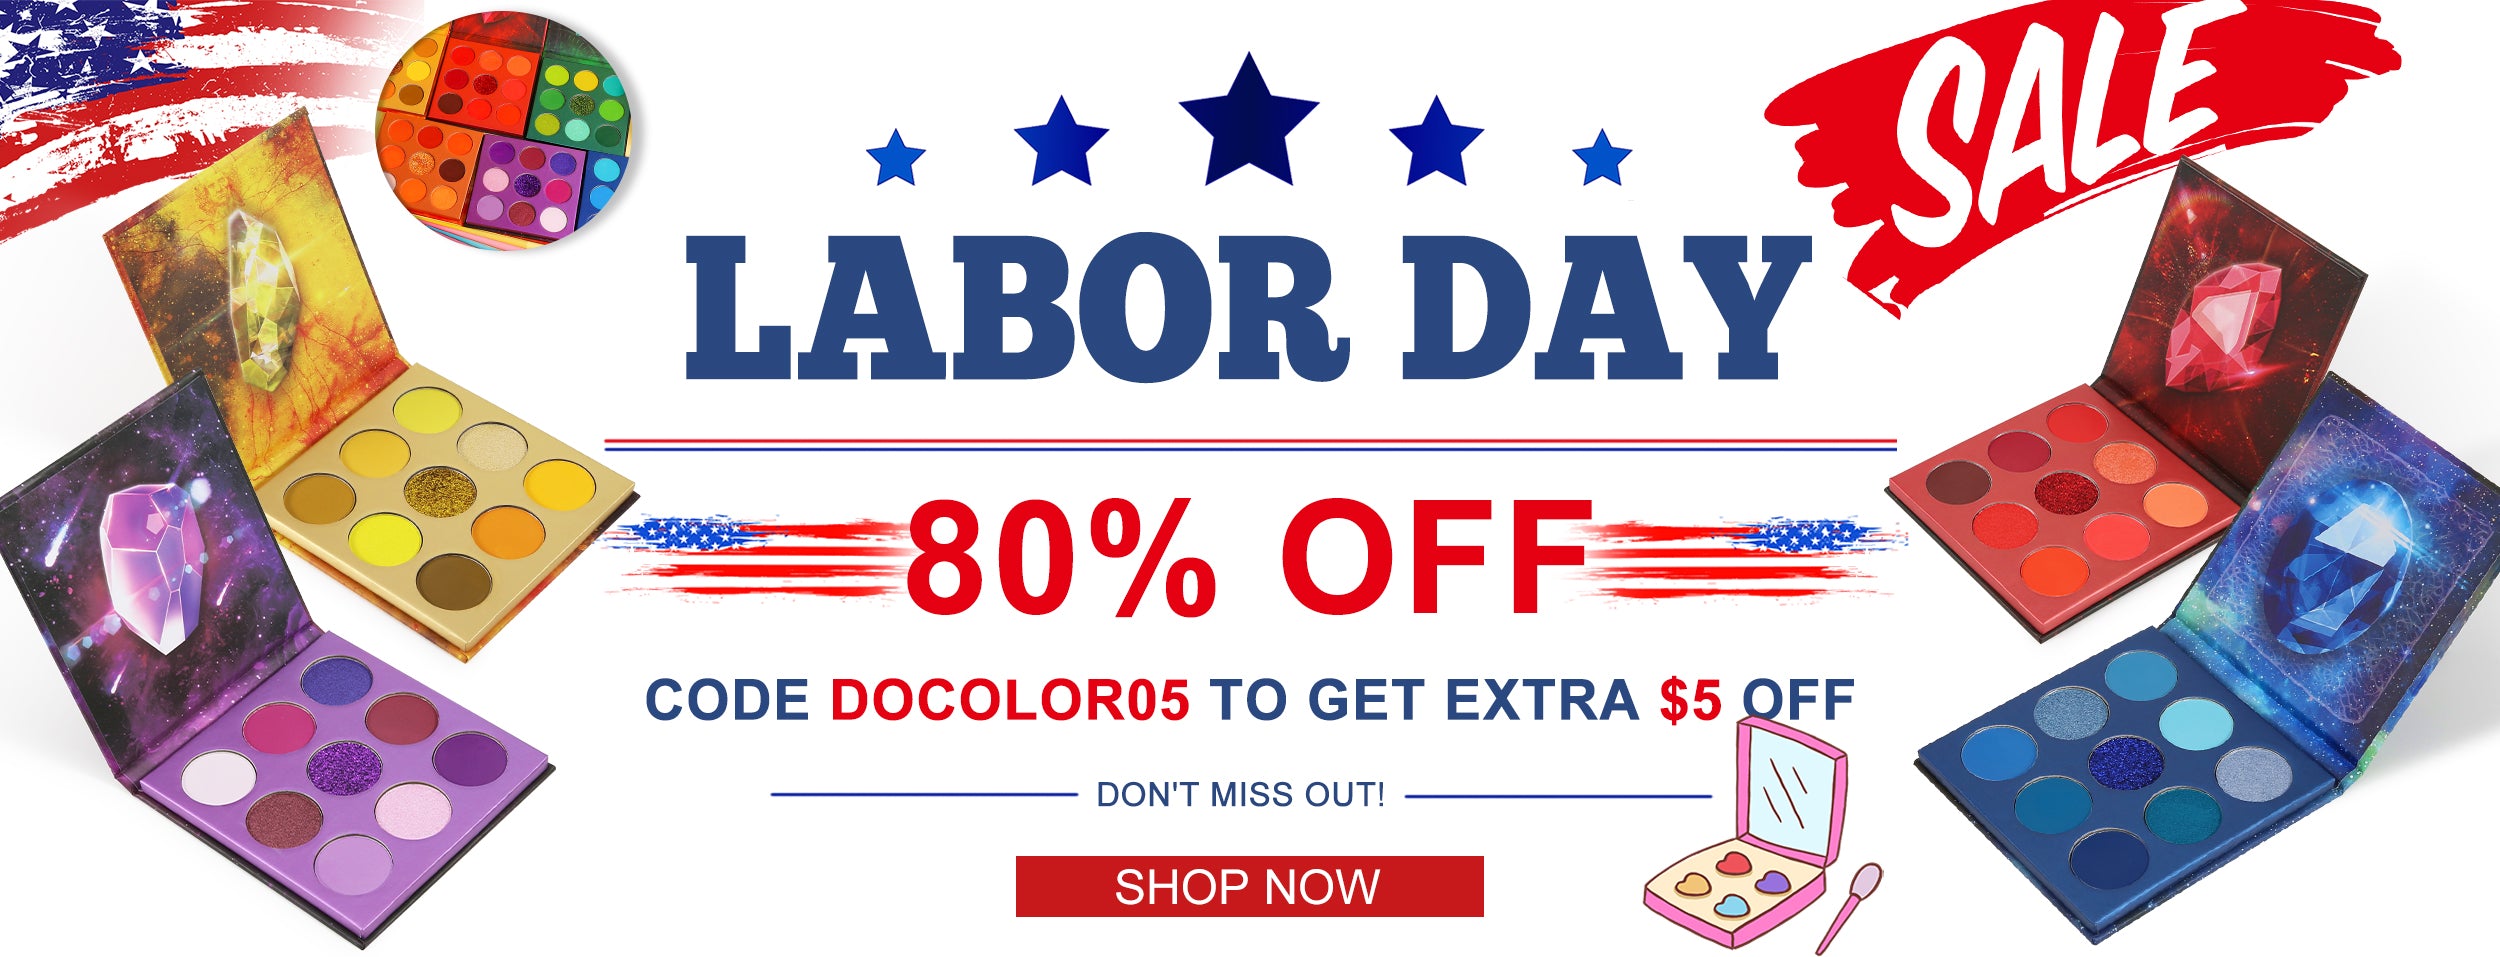 labor day sales makeup sales labor day 2022